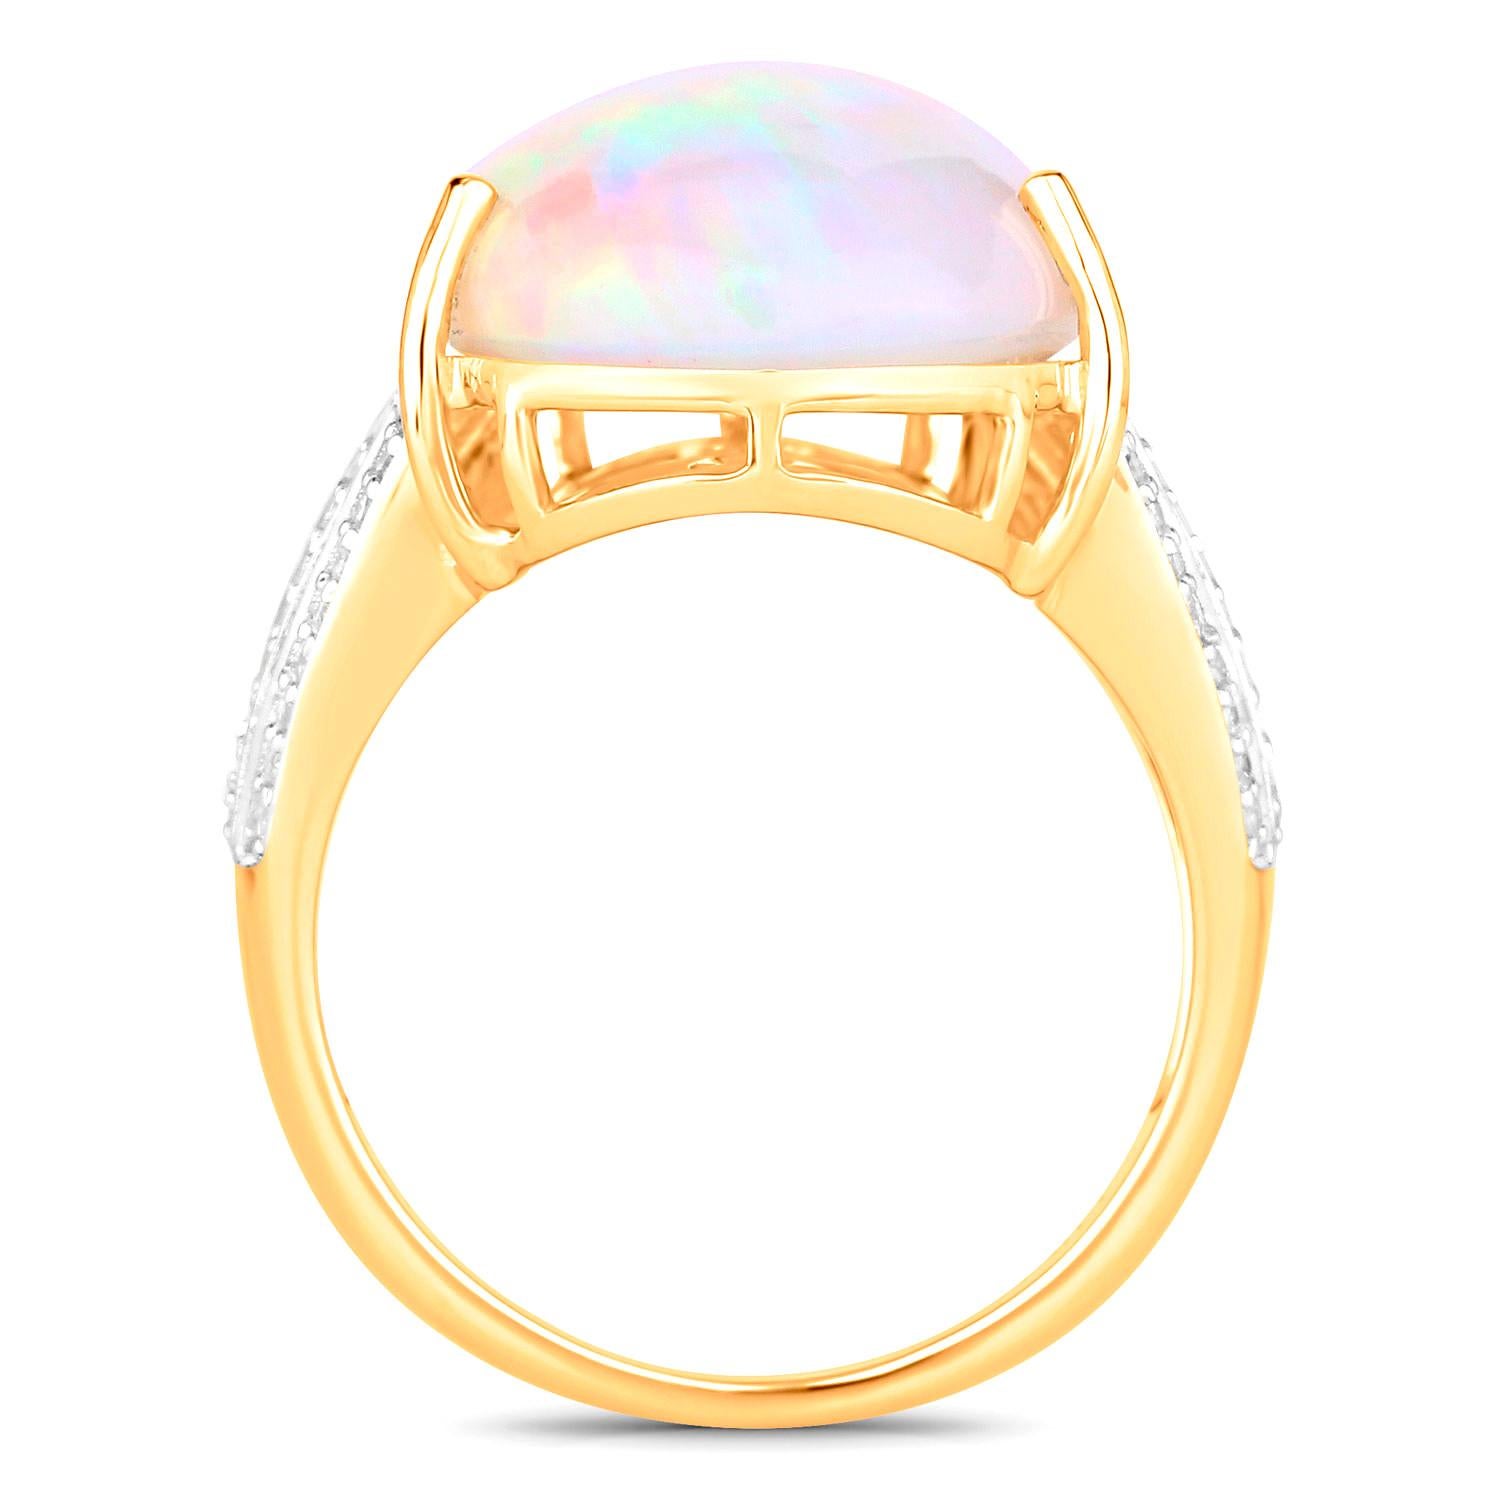 Important Natural 12 Carat Ethiopian Opal Cocktail Ring Diamond Setting 14K Gold In Excellent Condition For Sale In Laguna Niguel, CA